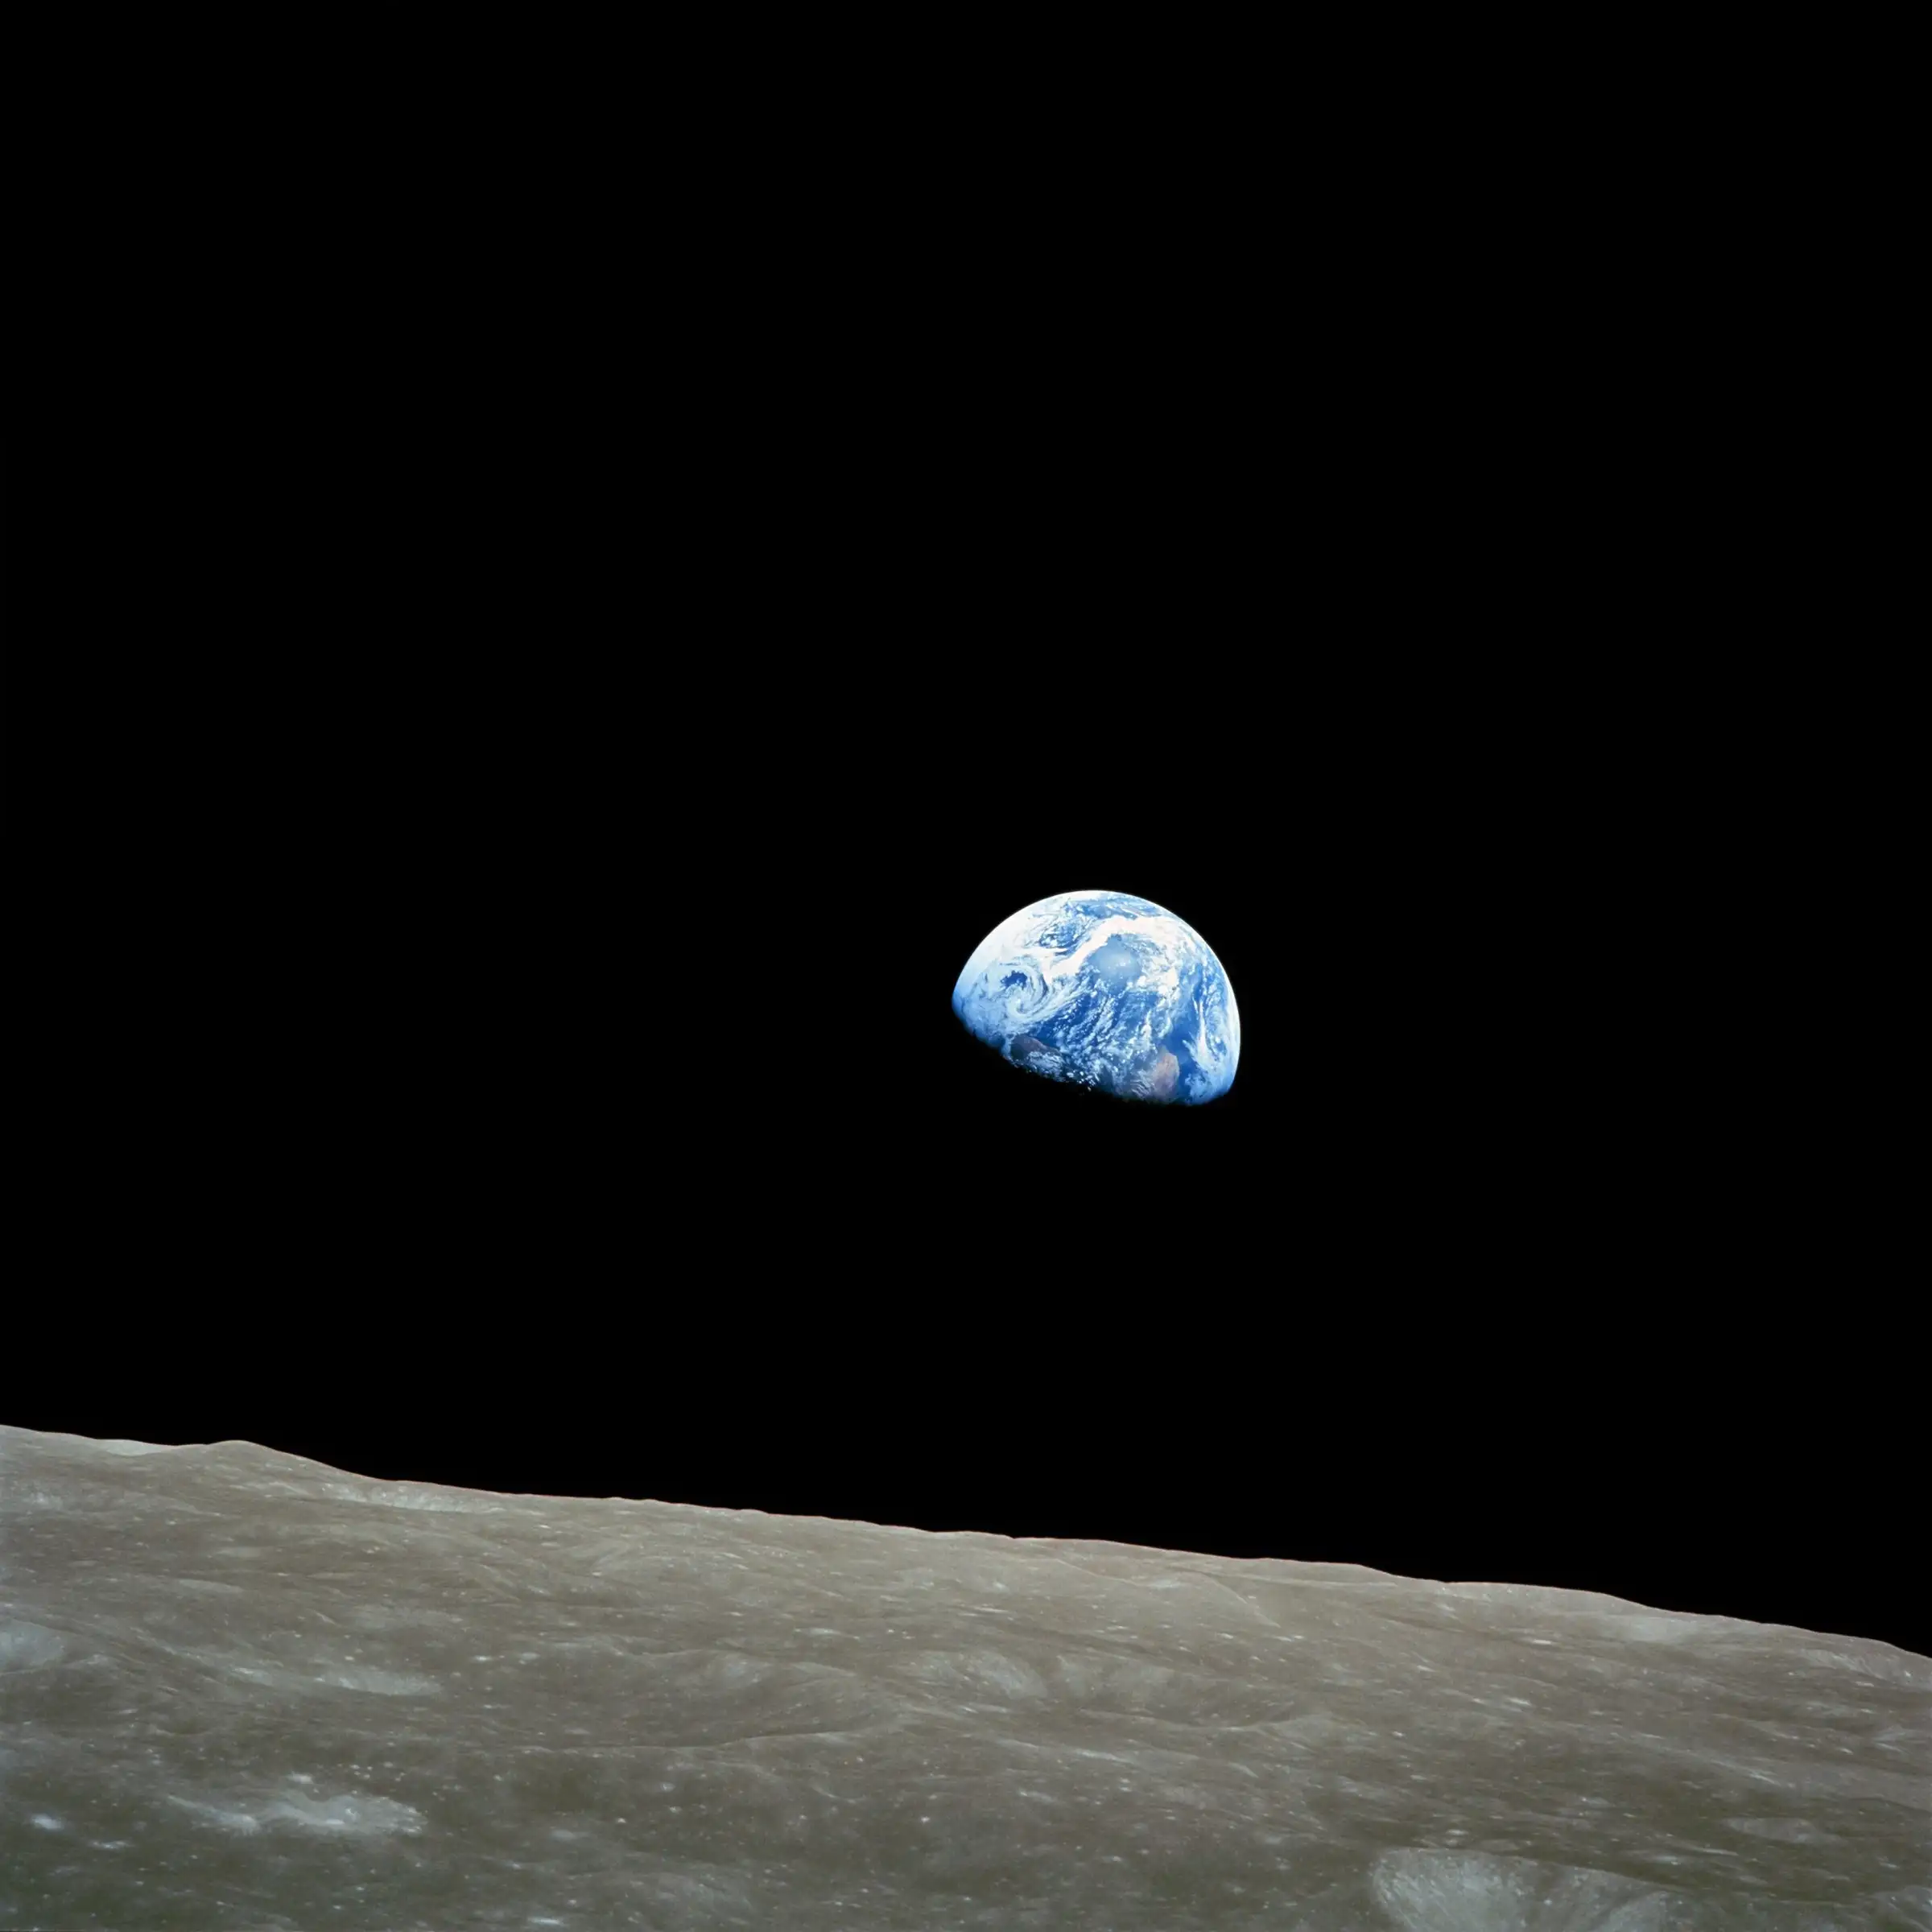 Earthrise, the iconic image of our home taken from Apollo 8 on 24 December 1968. Image credit: NASA.